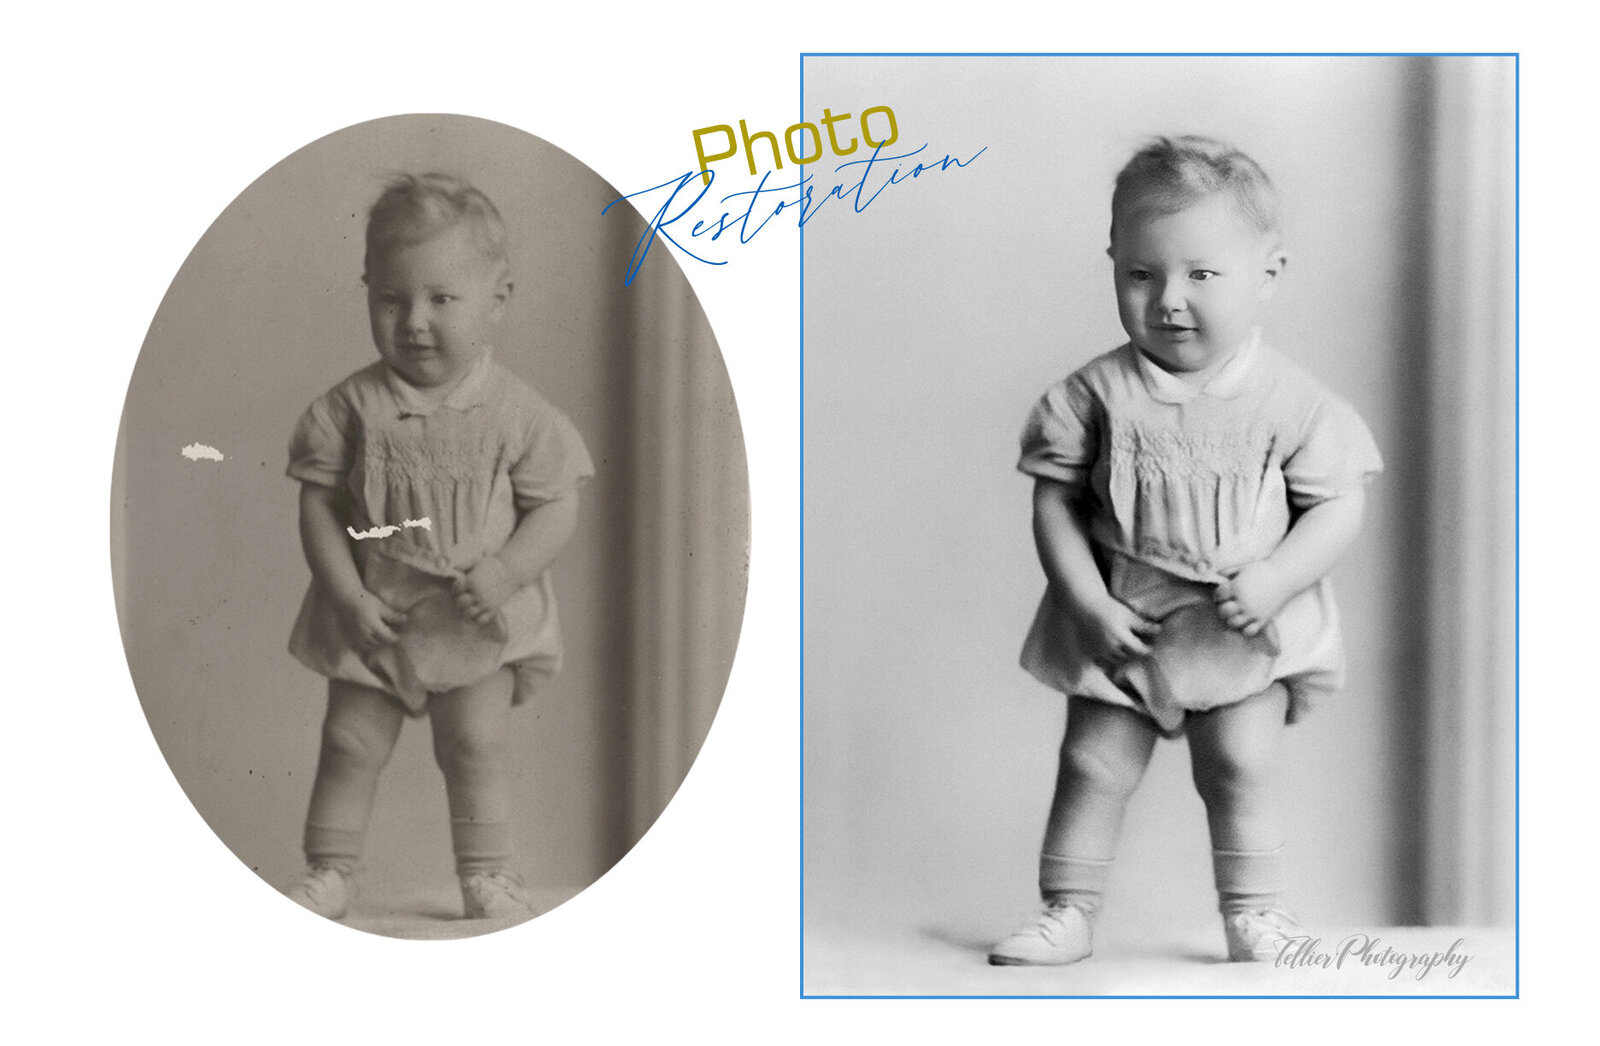 Restoring your photo